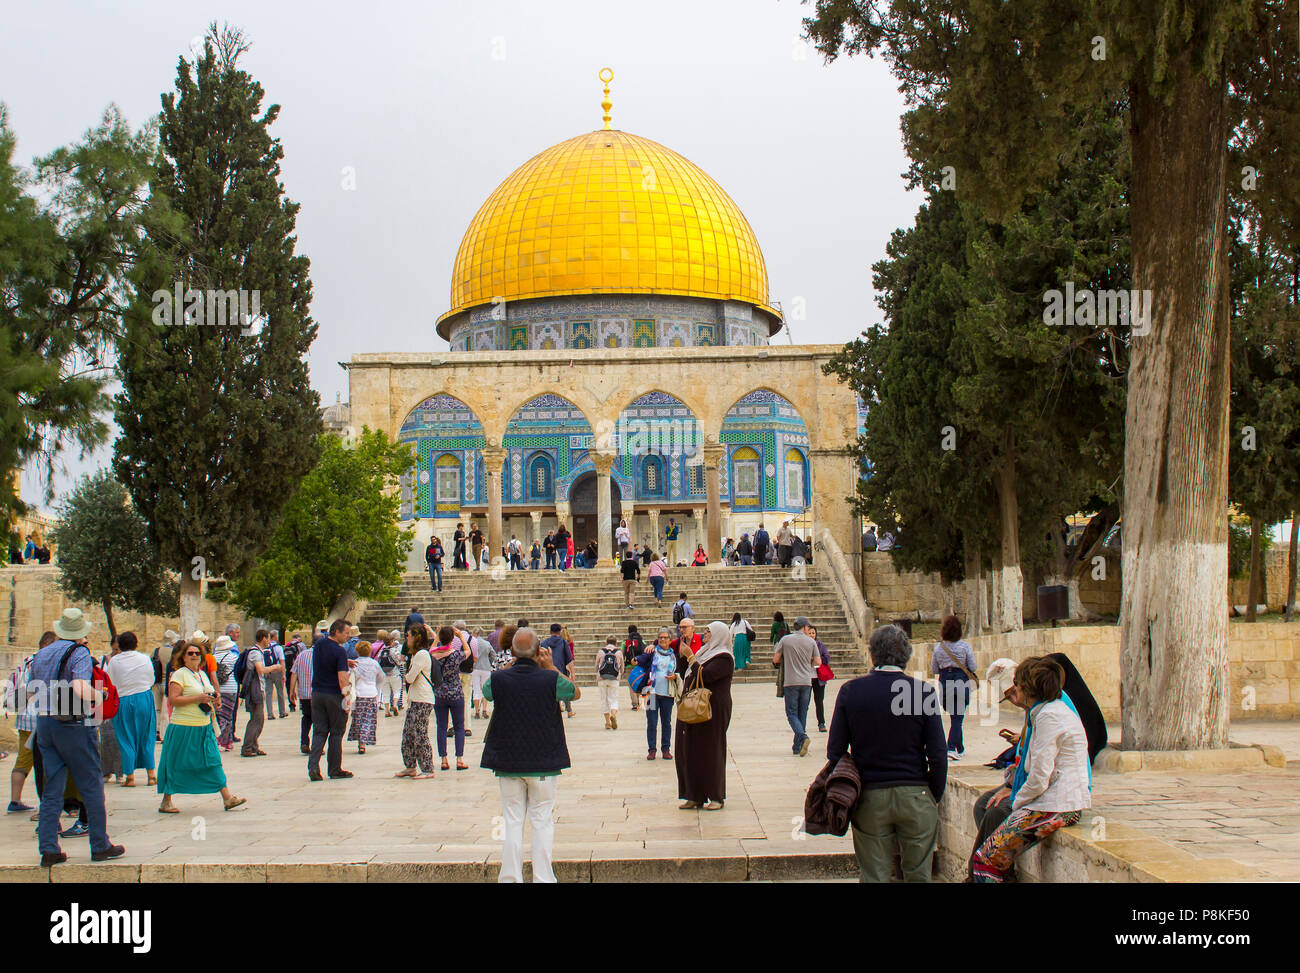 The Dome of the rock islamic Holy Place built on the site of the ancient Jewish Biblical Solomon's Temple. One of the most contested and sought after  Stock Photo